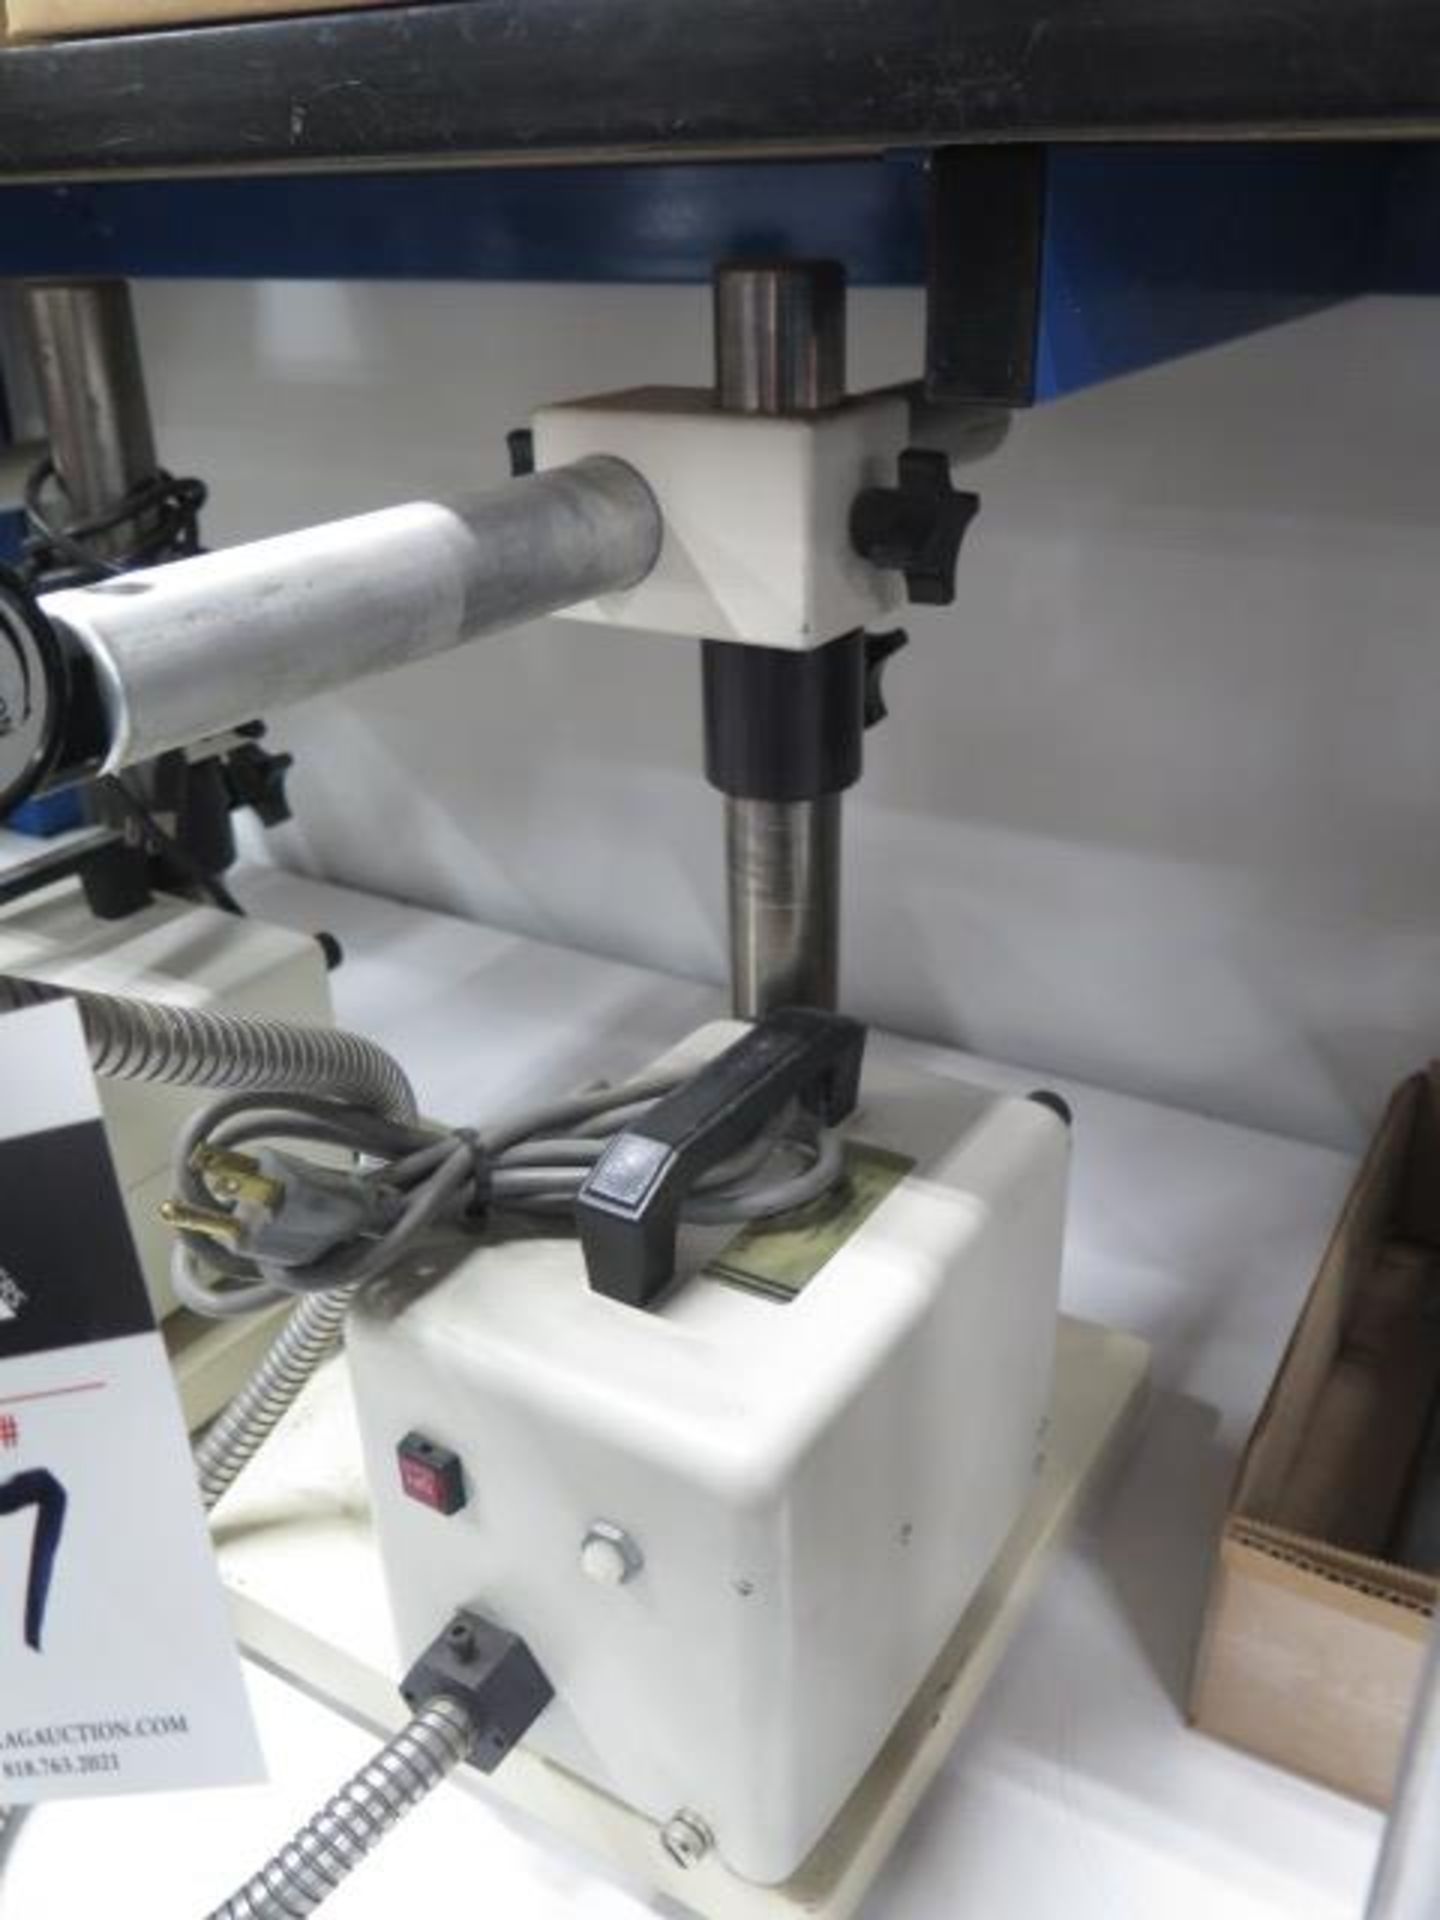 Unitron ZSM Stereo Microscope w/ Light Source (SOLD AS-IS - NO WARRANTY) - Image 4 of 7